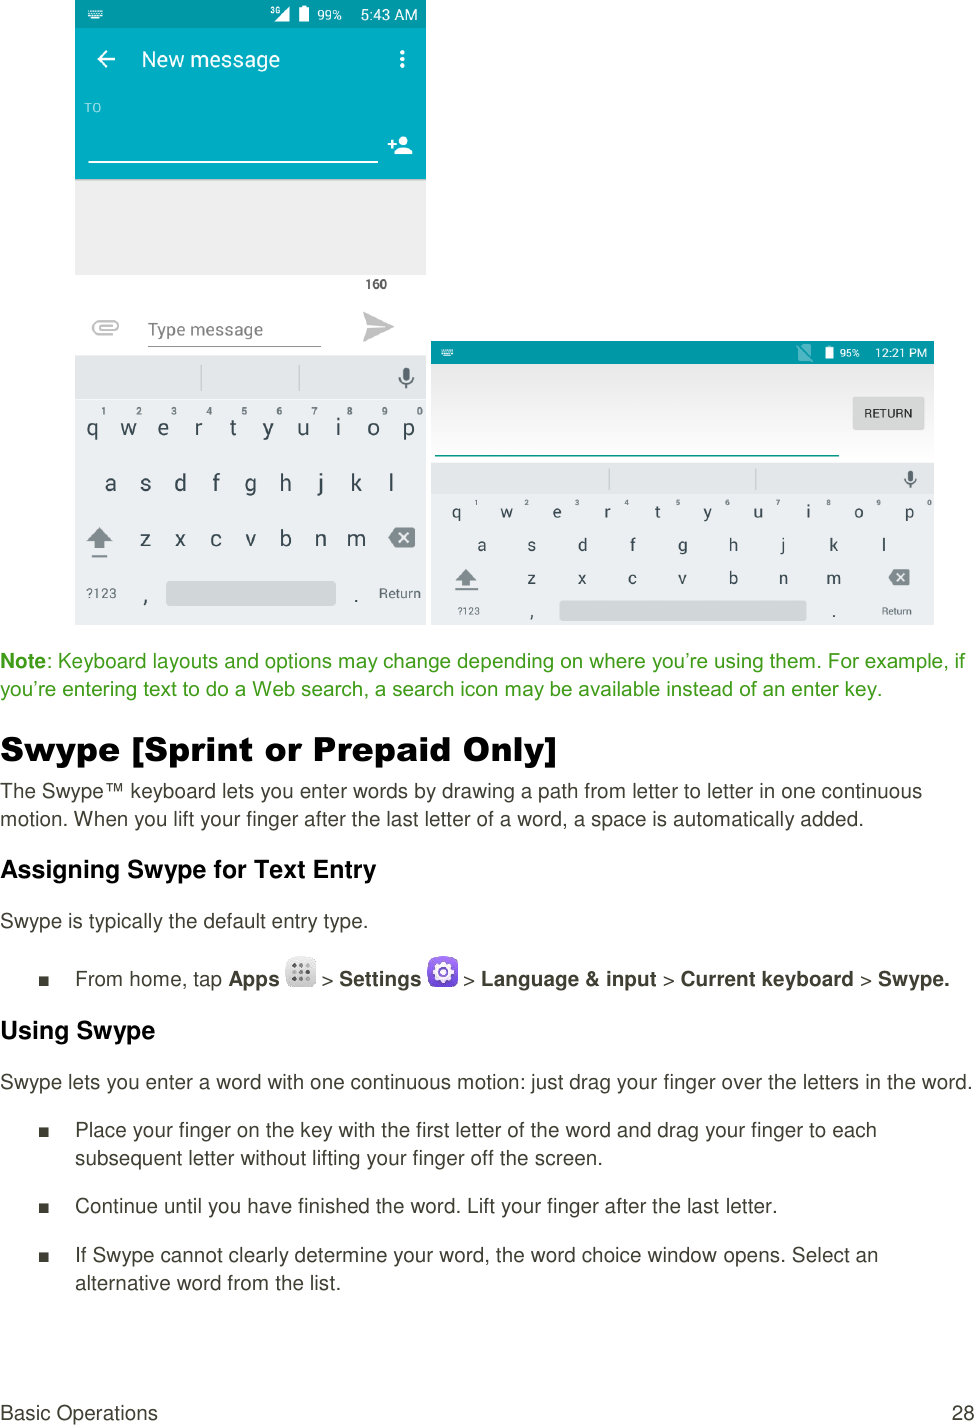 Basic Operations  28    Note: Keyboard layouts and options may change depending on where you’re using them. For example, if you’re entering text to do a Web search, a search icon may be available instead of an enter key. Swype [Sprint or Prepaid Only] The Swype™ keyboard lets you enter words by drawing a path from letter to letter in one continuous motion. When you lift your finger after the last letter of a word, a space is automatically added. Assigning Swype for Text Entry Swype is typically the default entry type. ■  From home, tap Apps   &gt; Settings   &gt; Language &amp; input &gt; Current keyboard &gt; Swype. Using Swype Swype lets you enter a word with one continuous motion: just drag your finger over the letters in the word. ■  Place your finger on the key with the first letter of the word and drag your finger to each subsequent letter without lifting your finger off the screen. ■  Continue until you have finished the word. Lift your finger after the last letter. ■  If Swype cannot clearly determine your word, the word choice window opens. Select an alternative word from the list. 